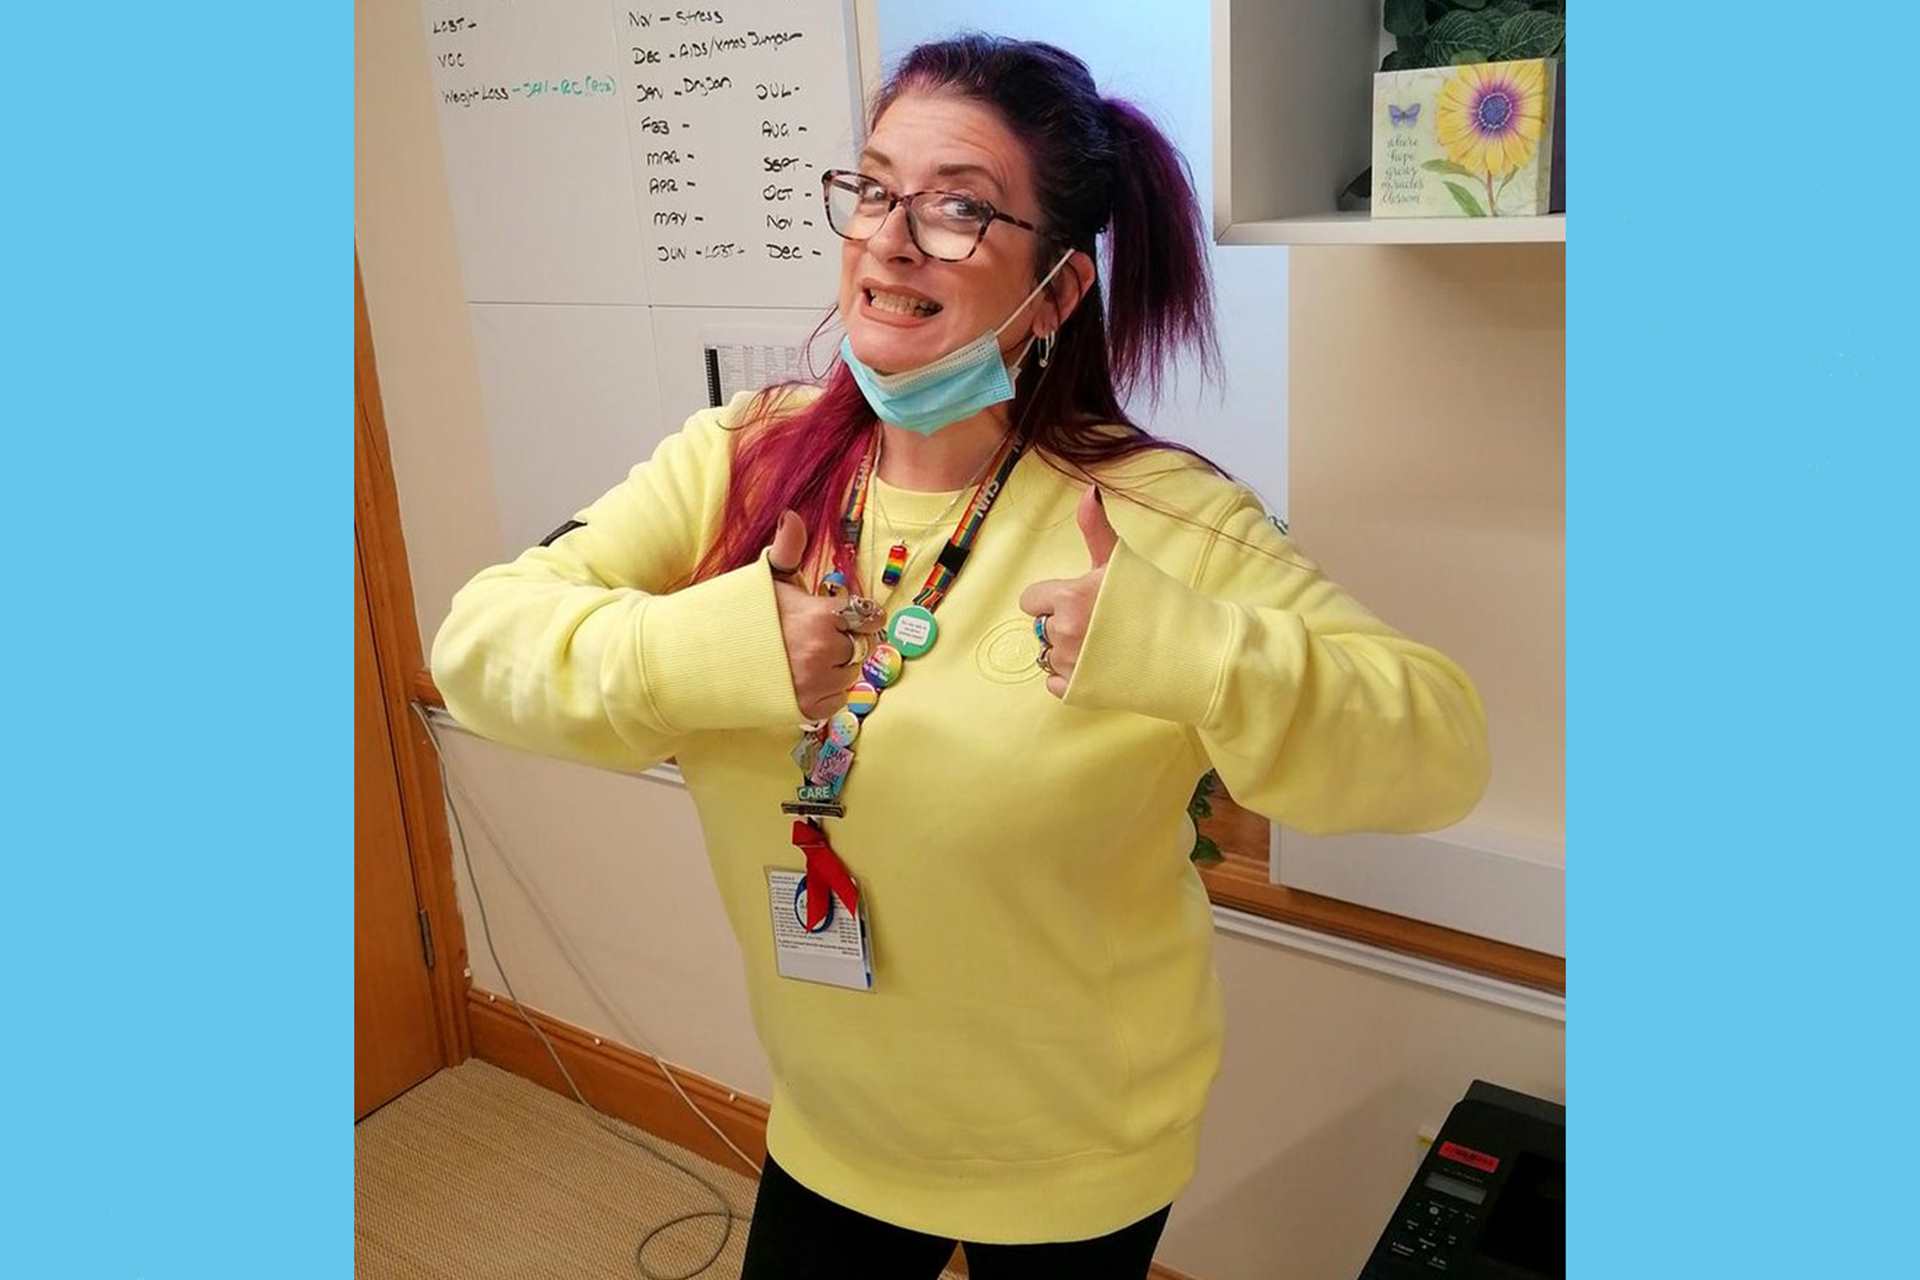 An NHS worker poses in a yellow jumper.